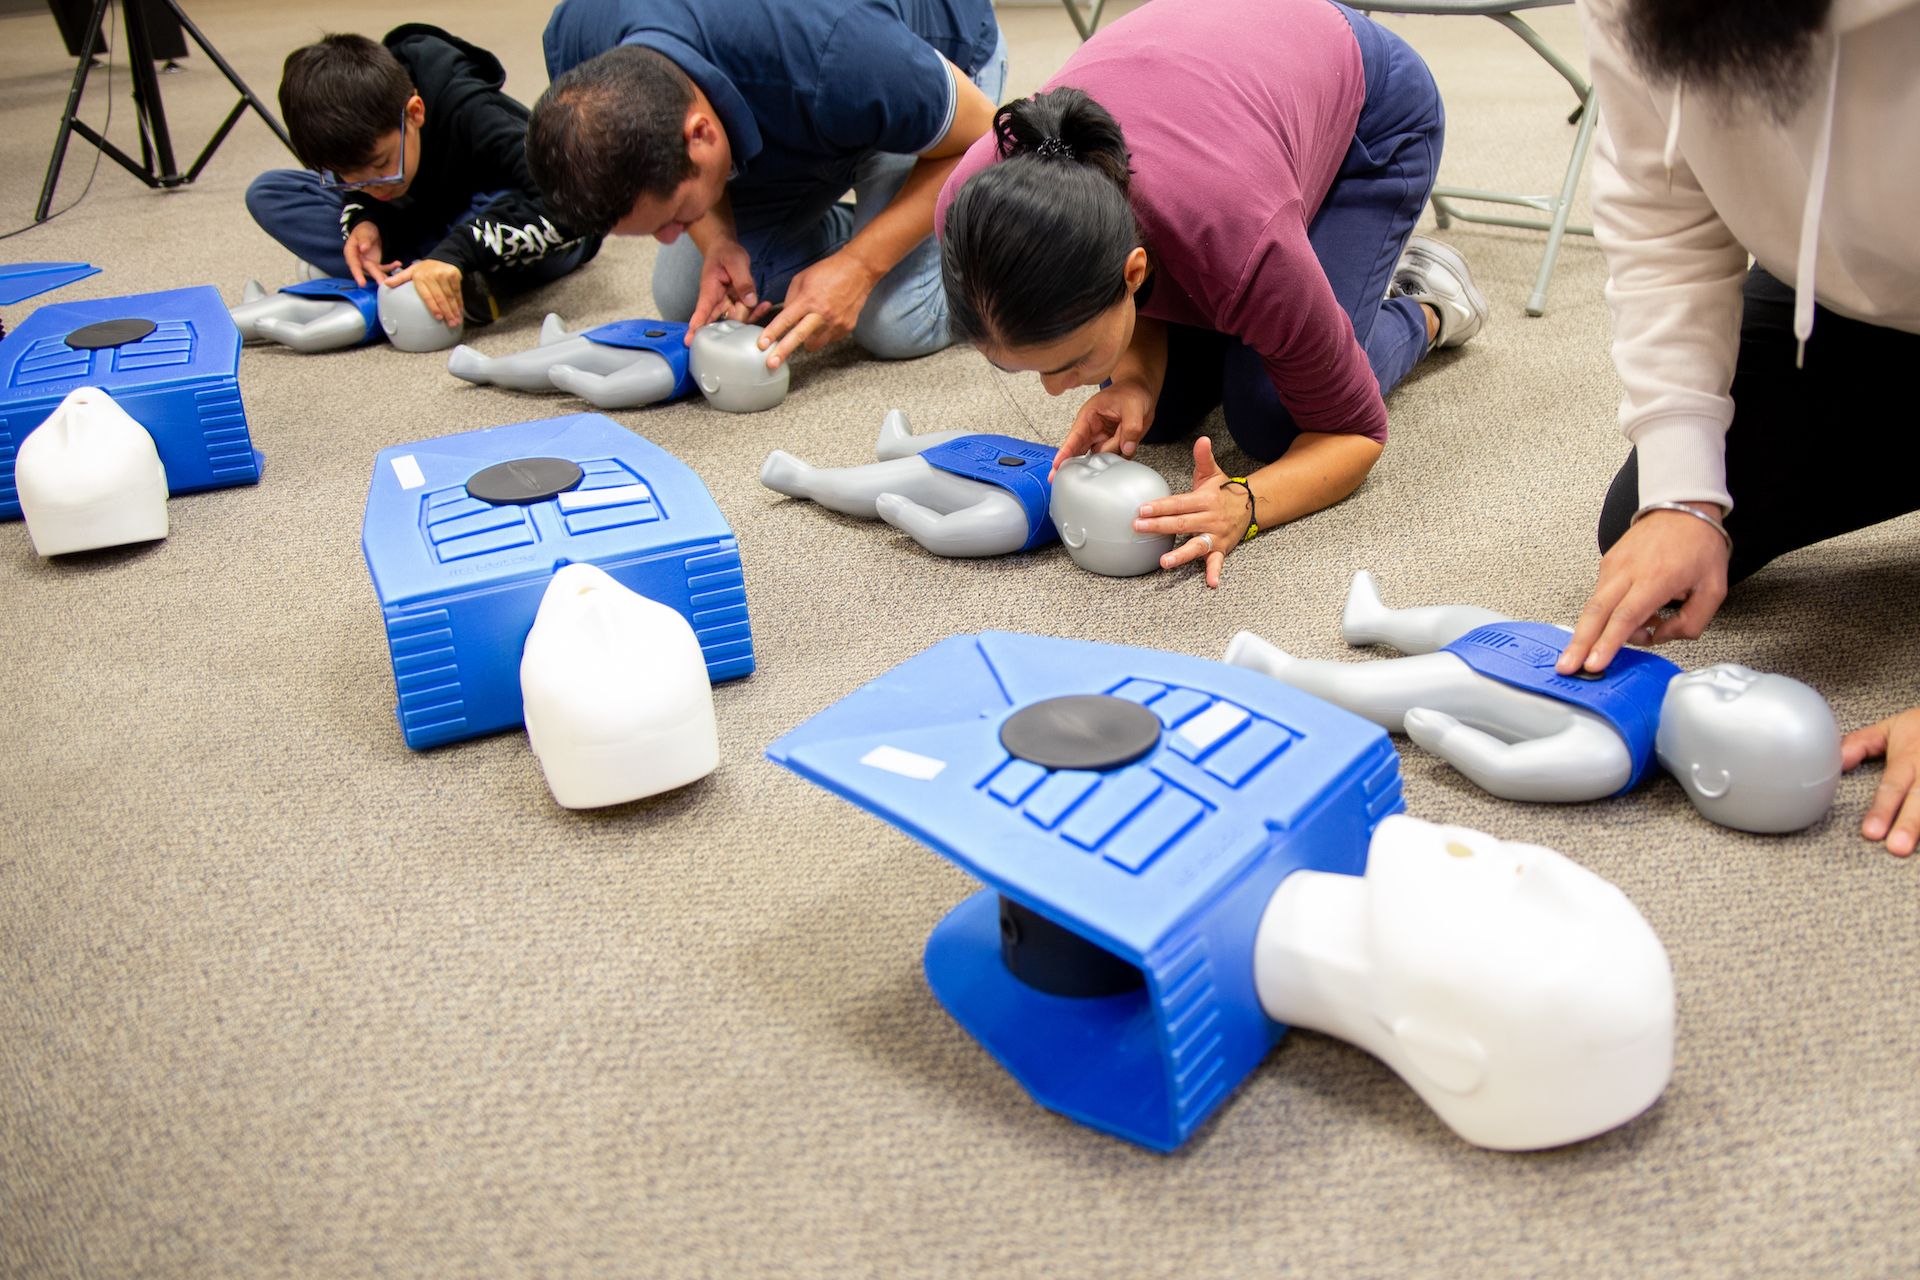 A group of First Aid and CPR trainees learning using dummies / mannequins at Flex Point Academy